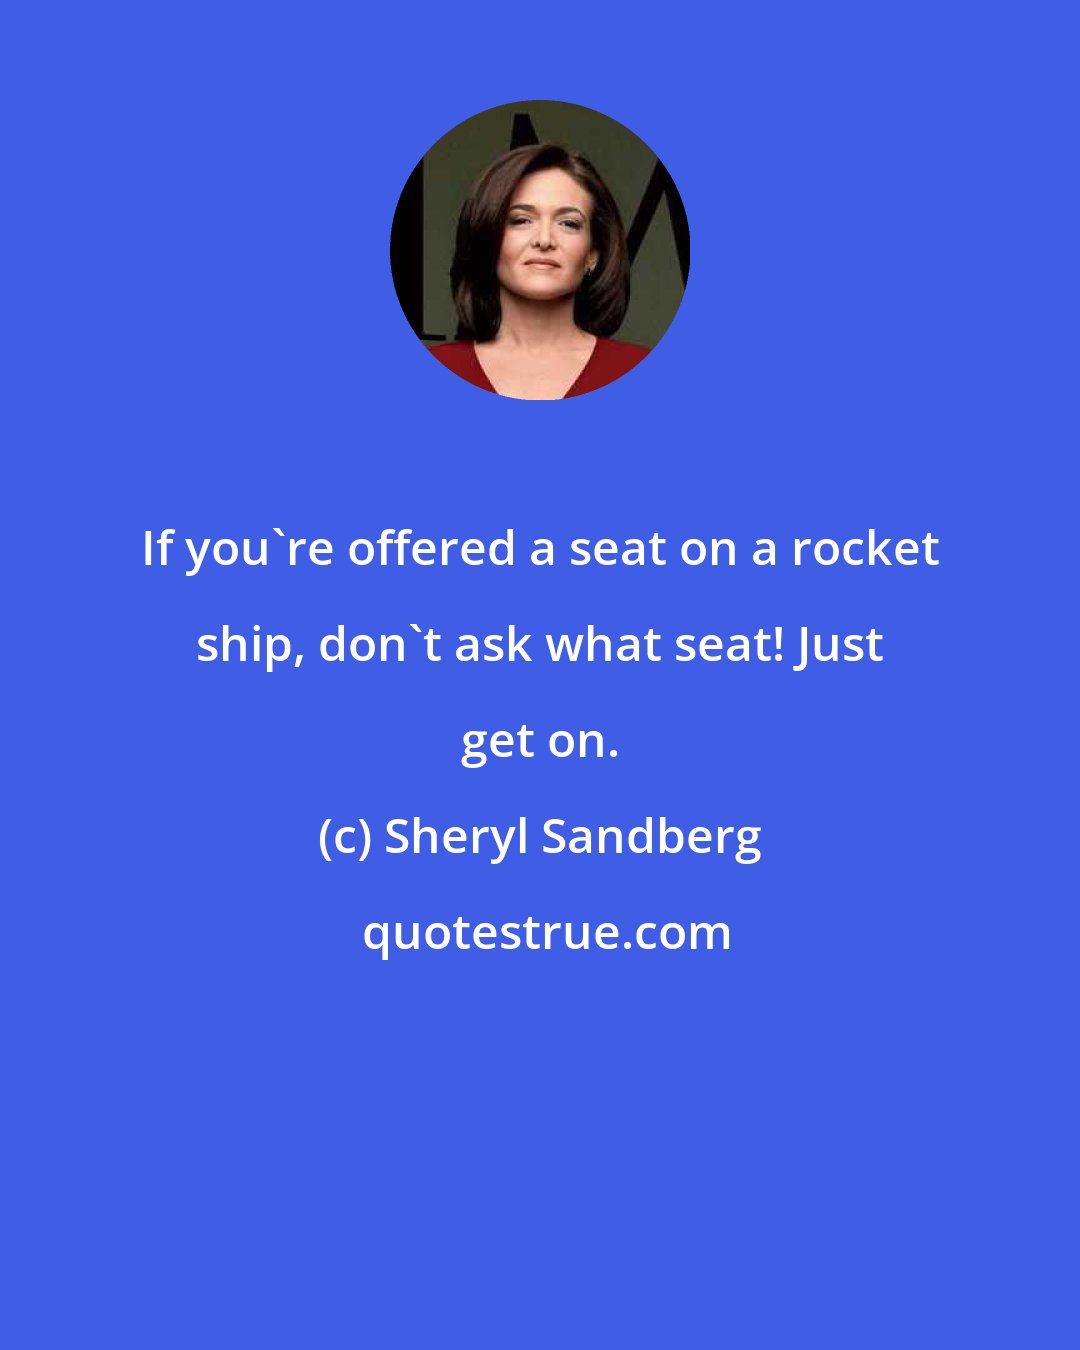 Sheryl Sandberg: If you're offered a seat on a rocket ship, don't ask what seat! Just get on.